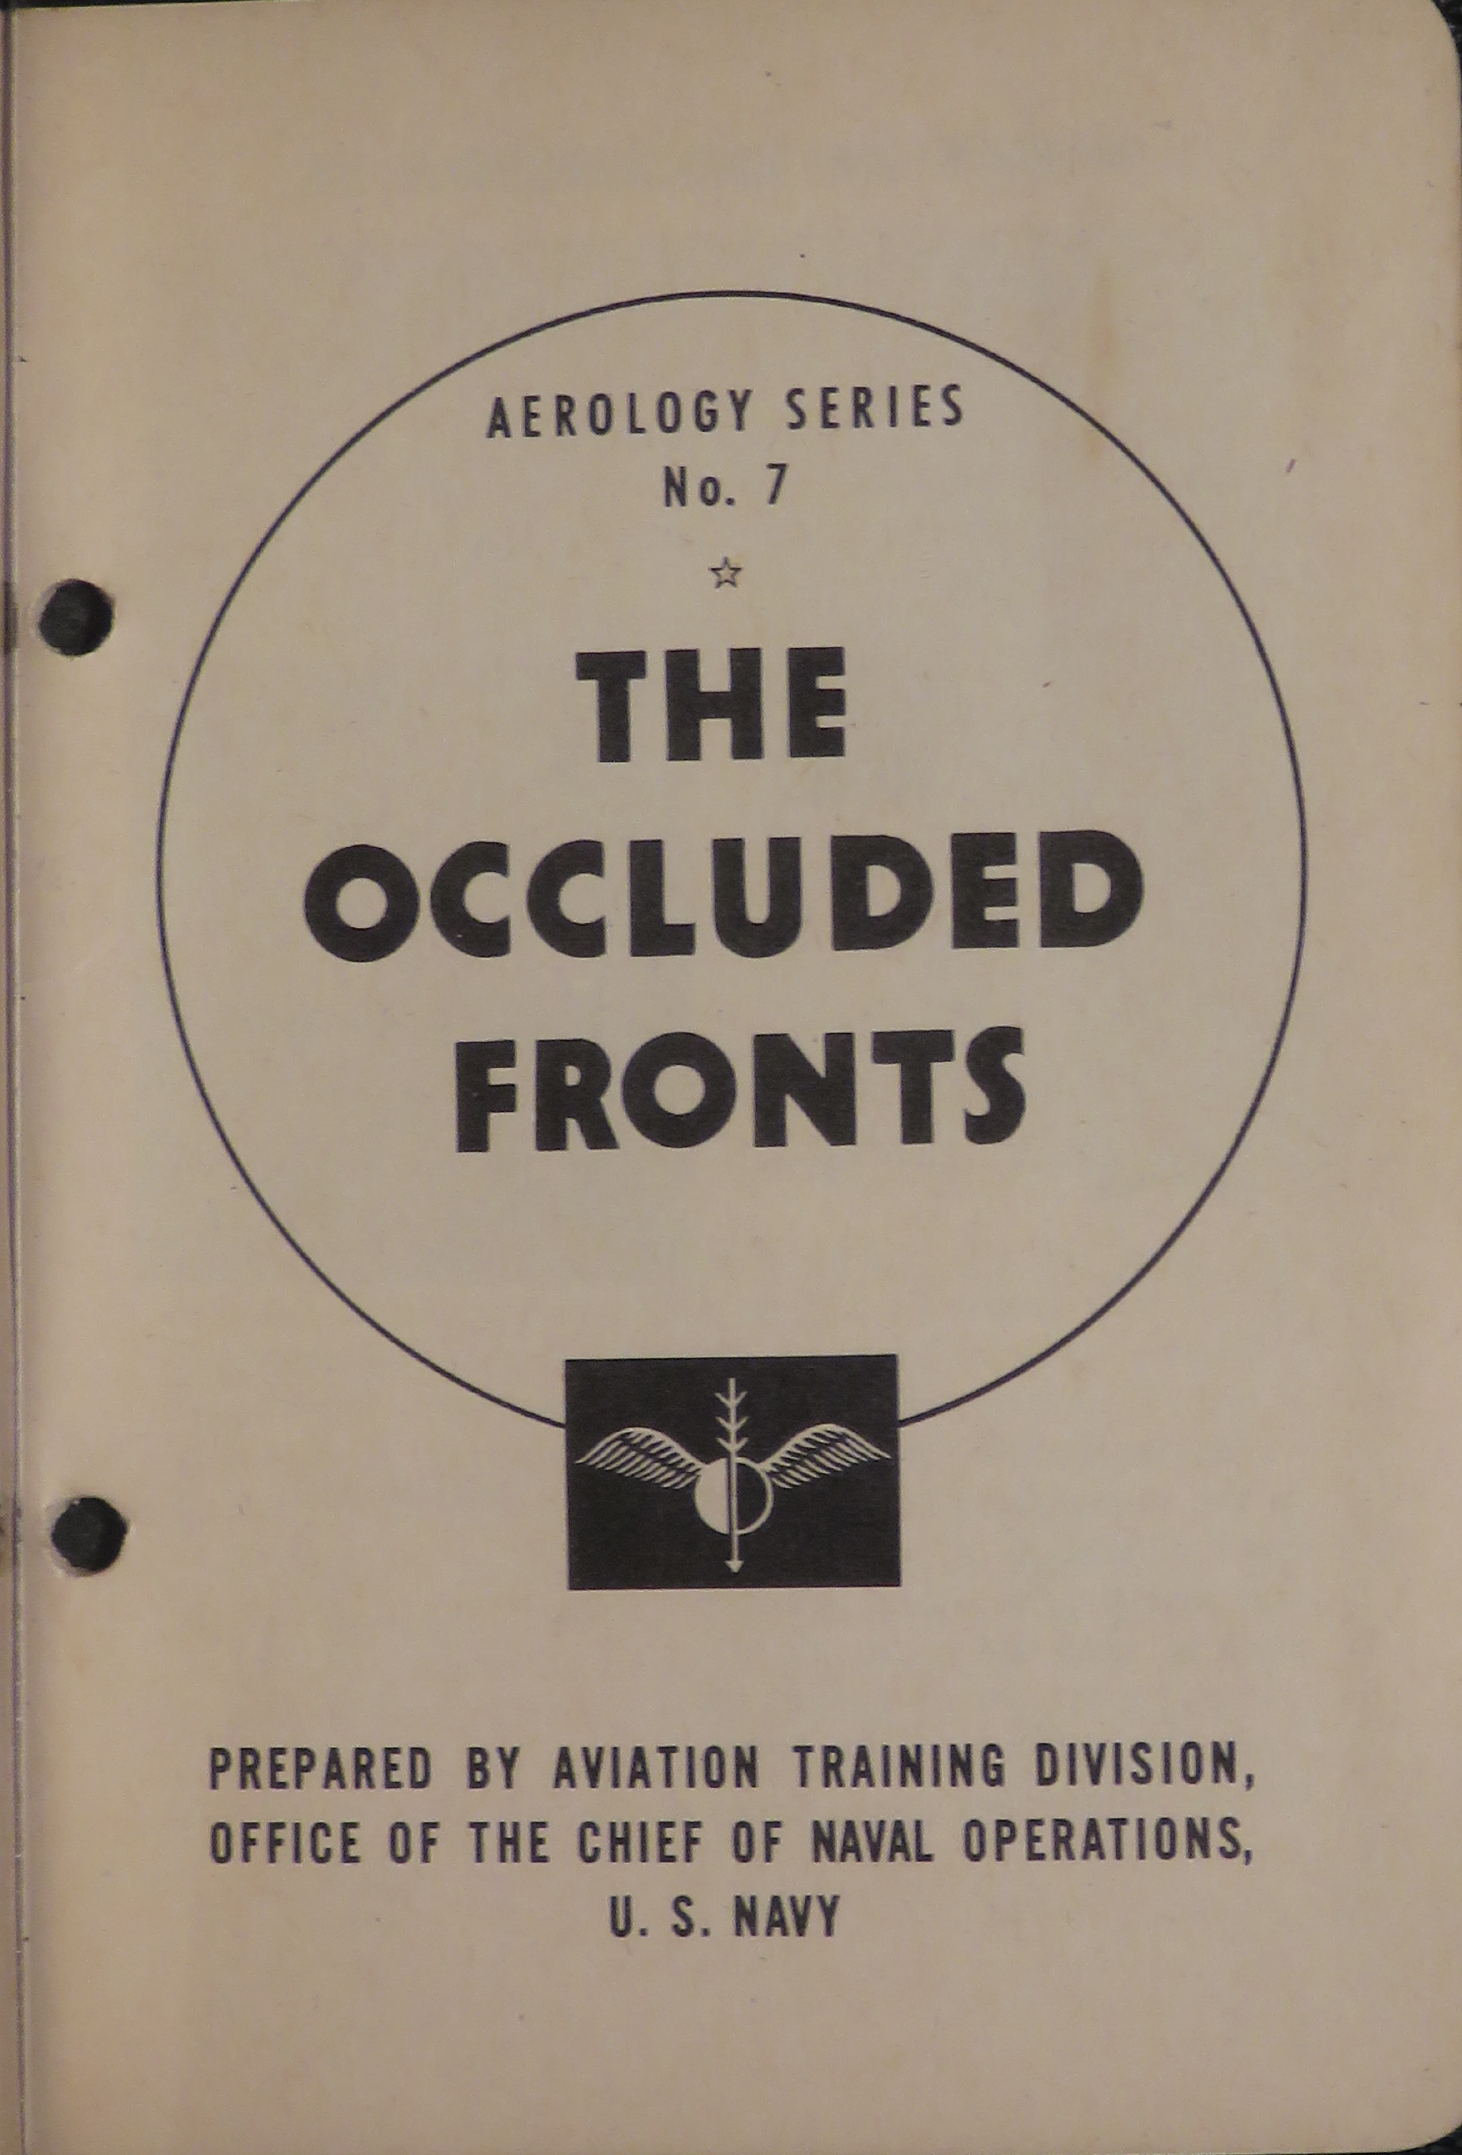 Sample page 3 from AirCorps Library document: Aerology Series No. 7; The Occluded Fronts